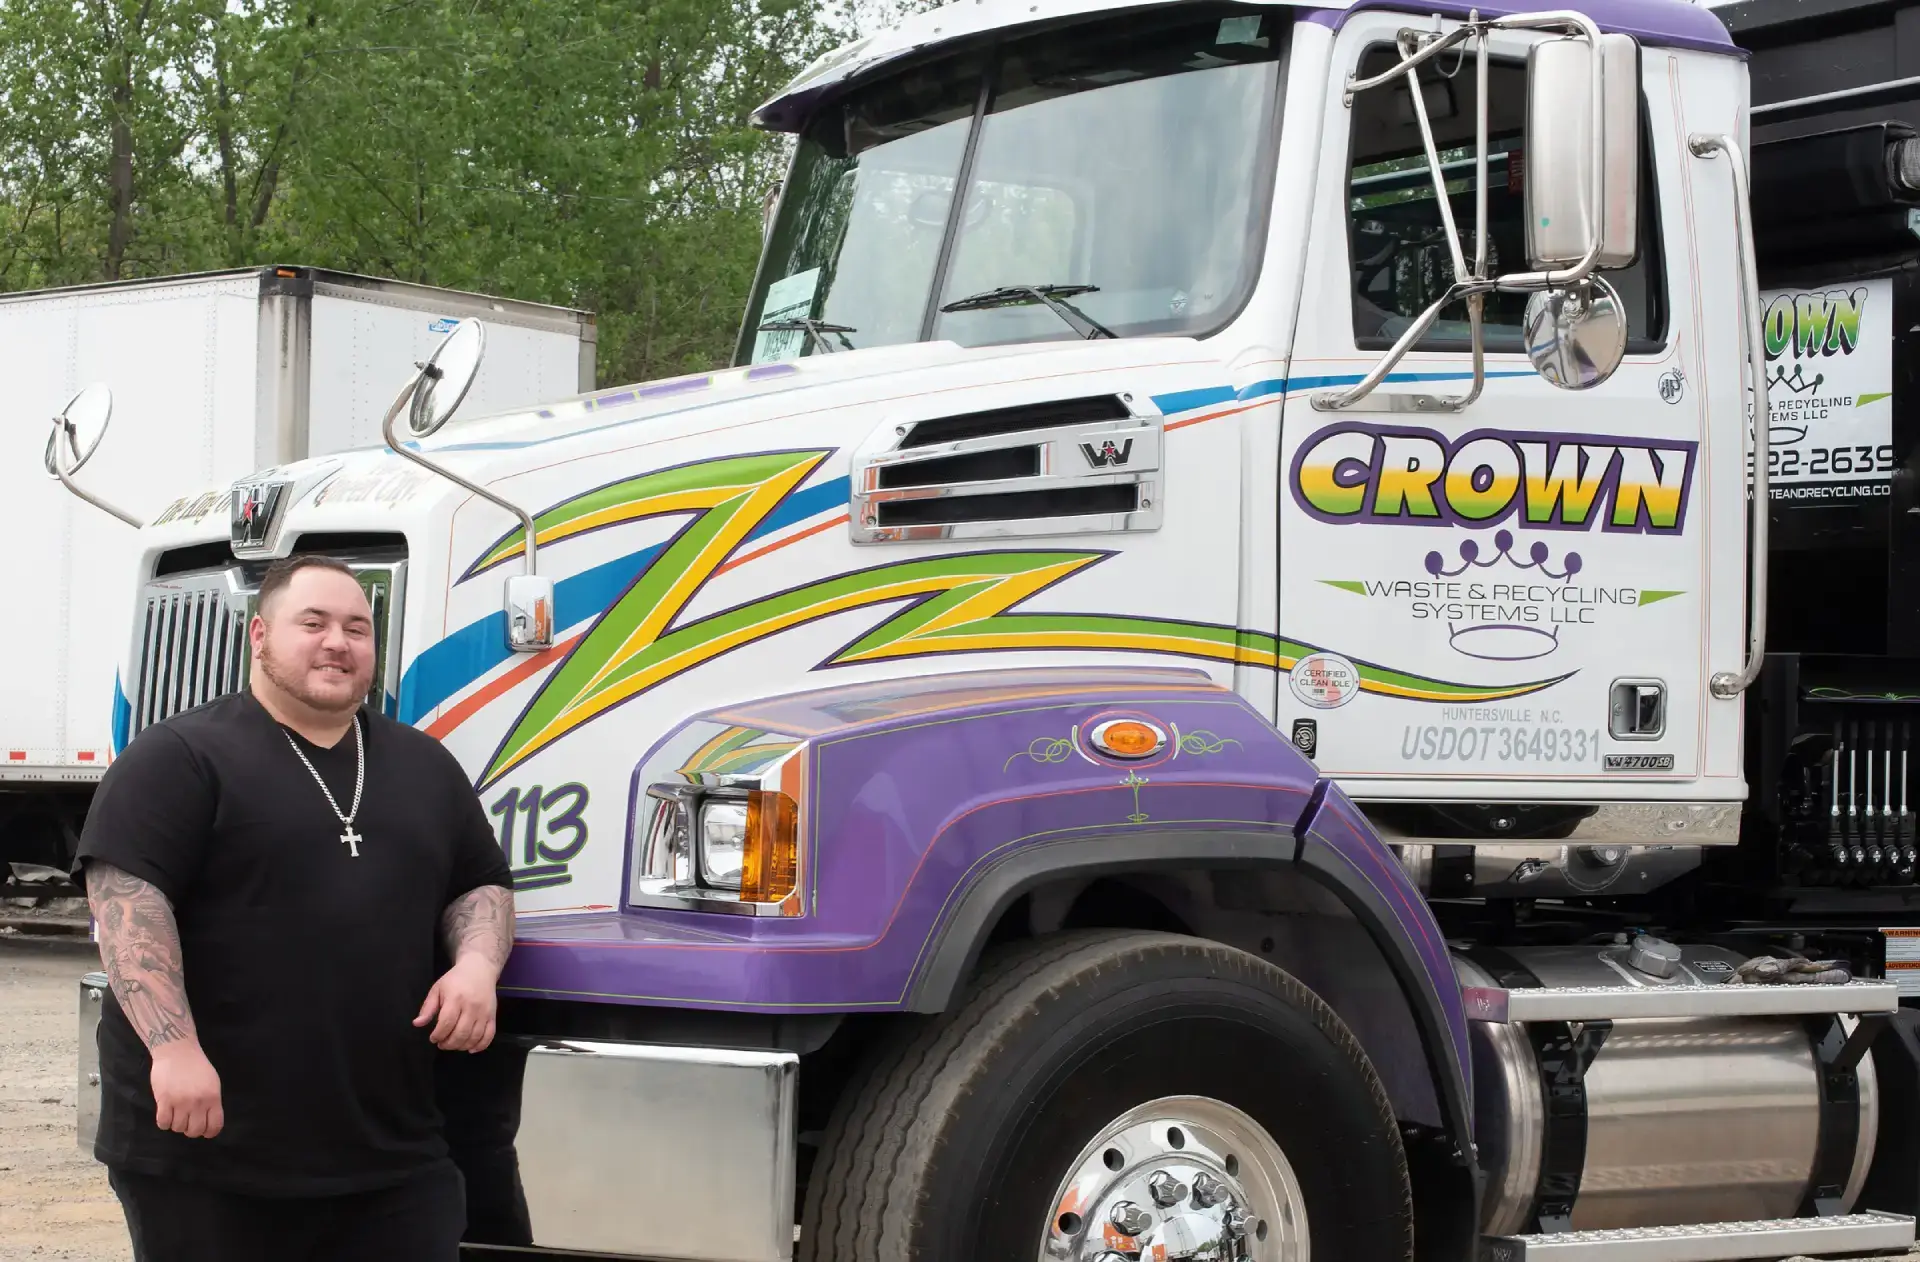 About Crown Waste & Recycling Systems LLC